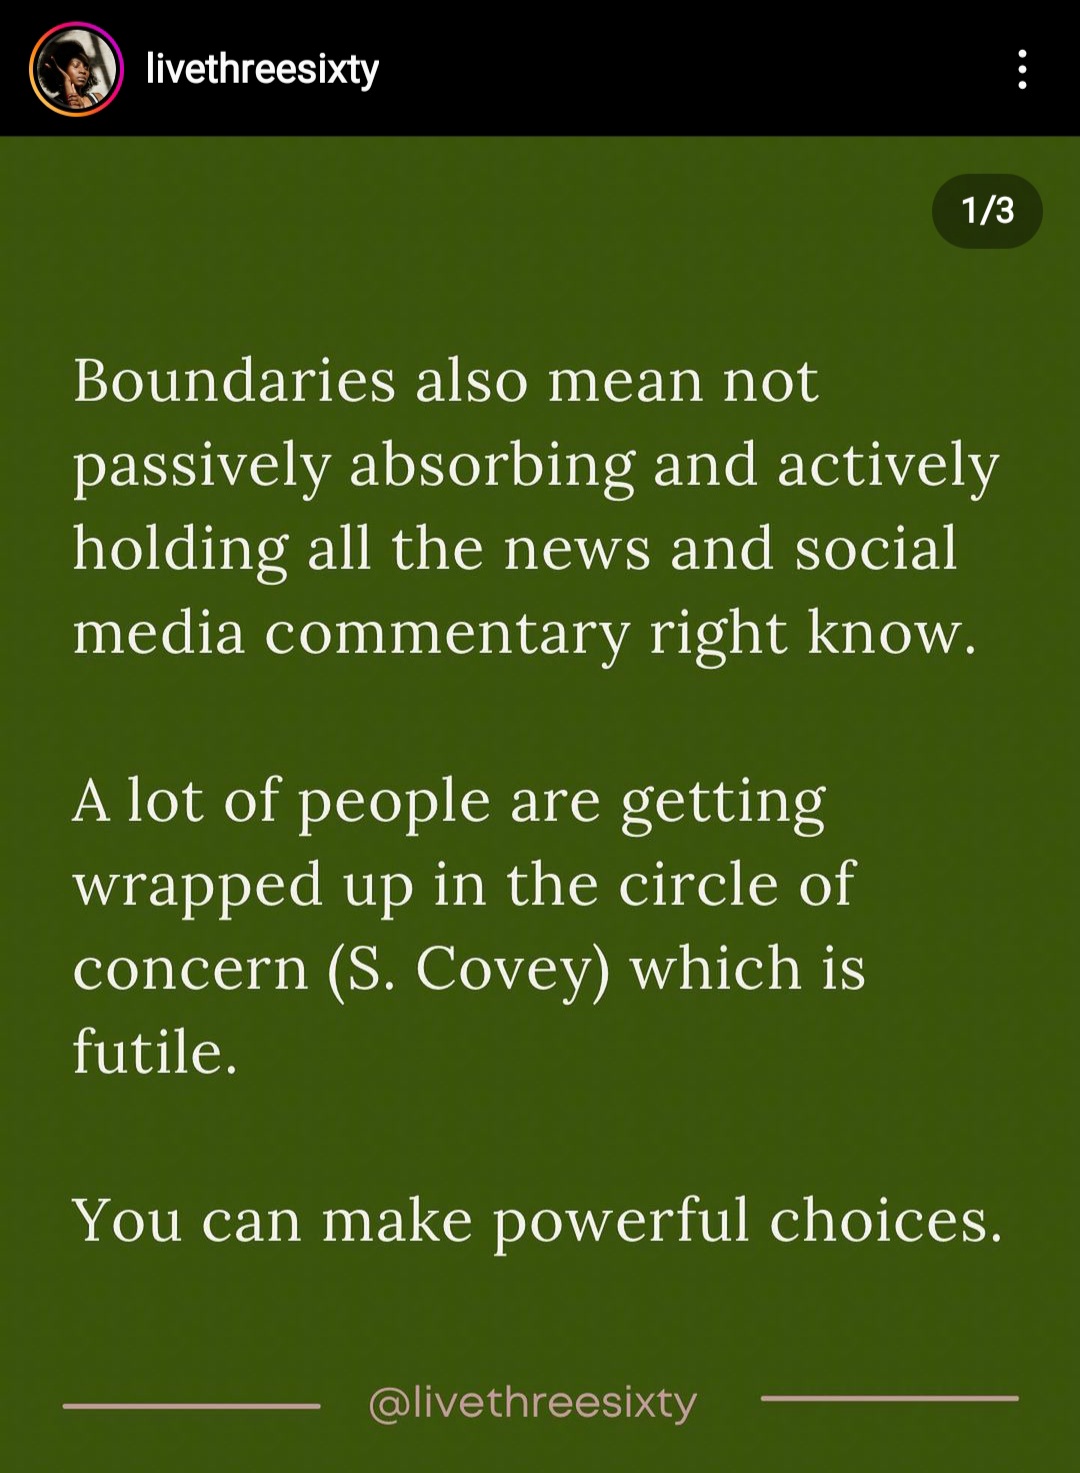 Boundaries also mean not passively absorbing and actively holding all the news and social media commentary right now. A lot of people are getting wrapped in the circle of concern which is futile. You can make powerful choices. Tamu Thomas, coaching tip